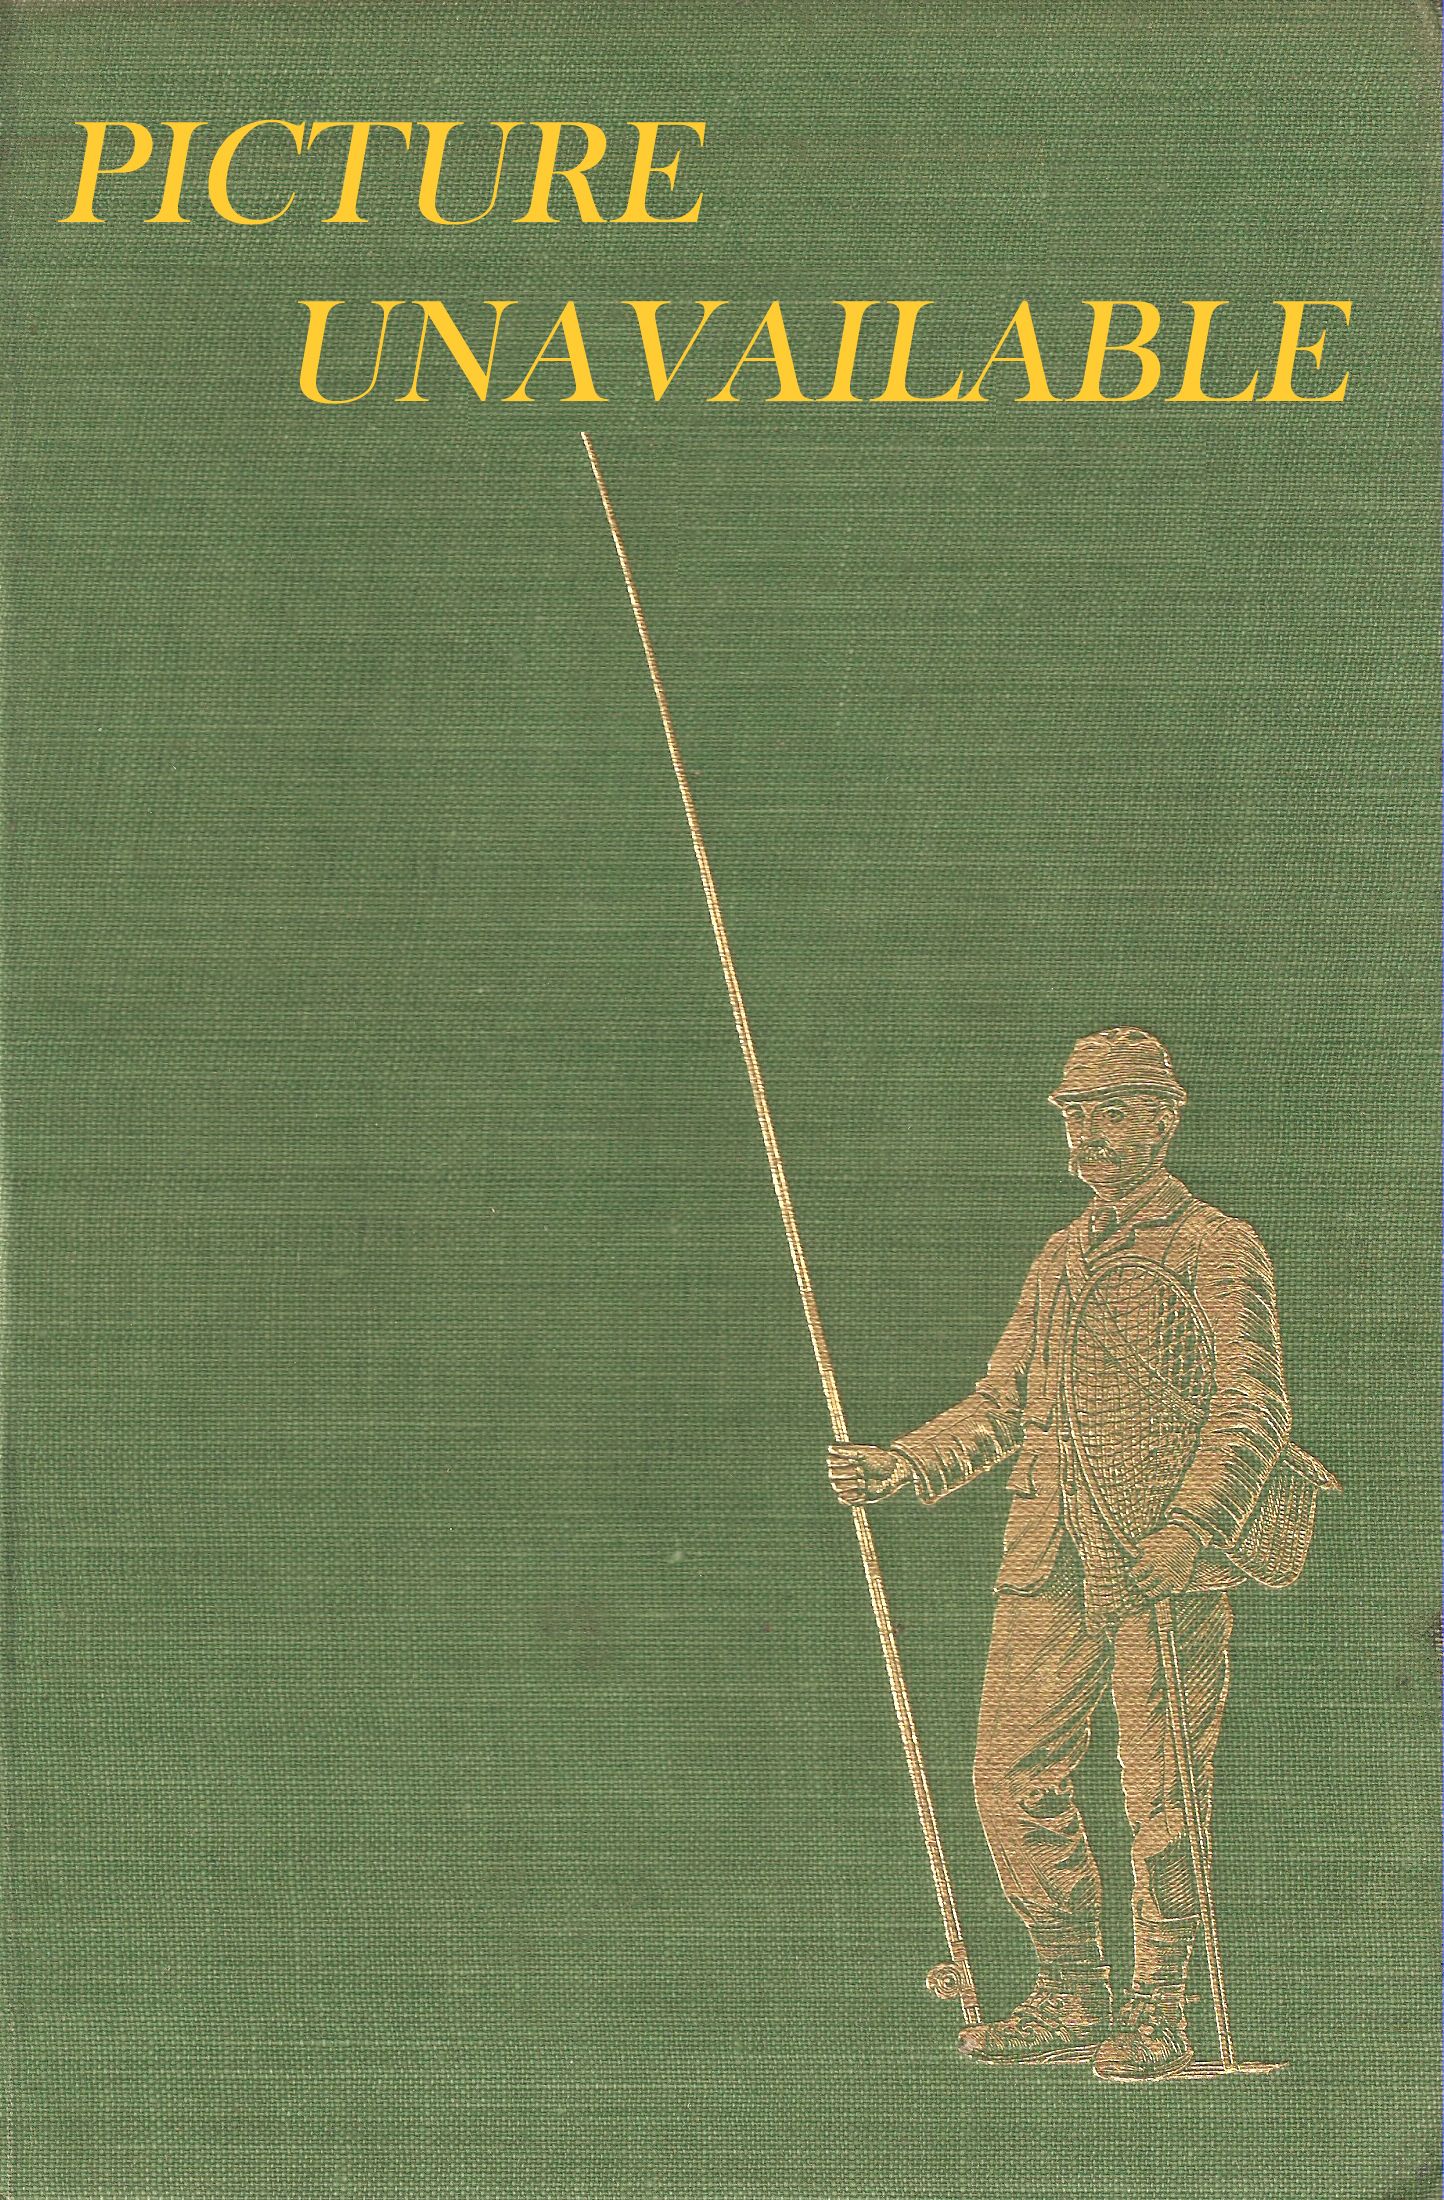 THE BOYS' BOOK OF ANGLING. By Major-General R.N. Stewart.